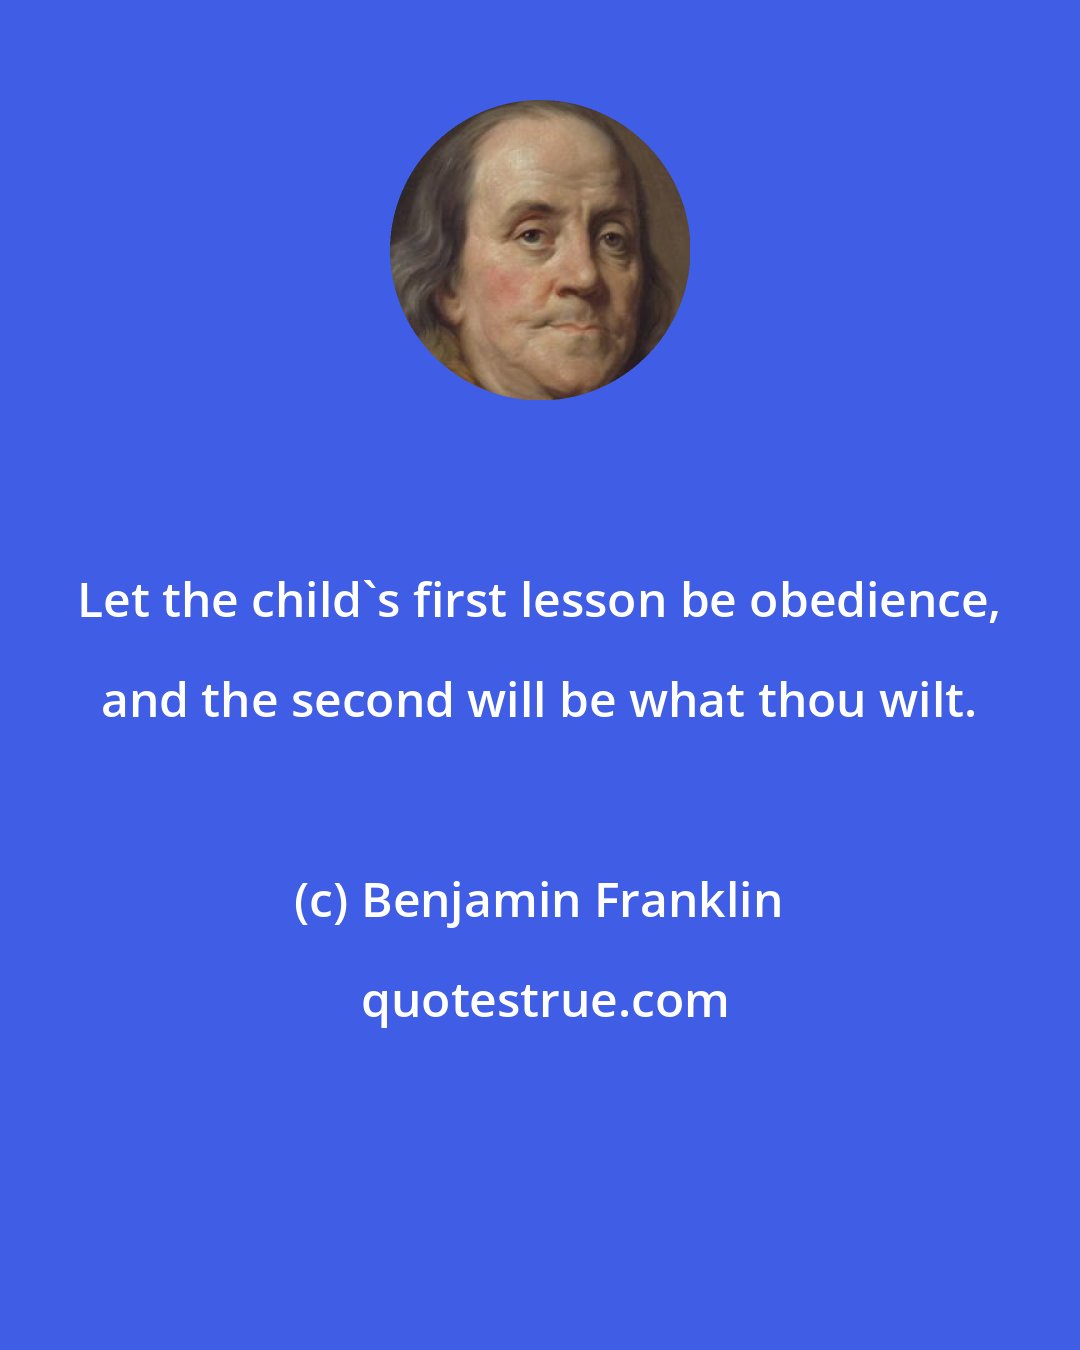 Benjamin Franklin: Let the child's first lesson be obedience, and the second will be what thou wilt.